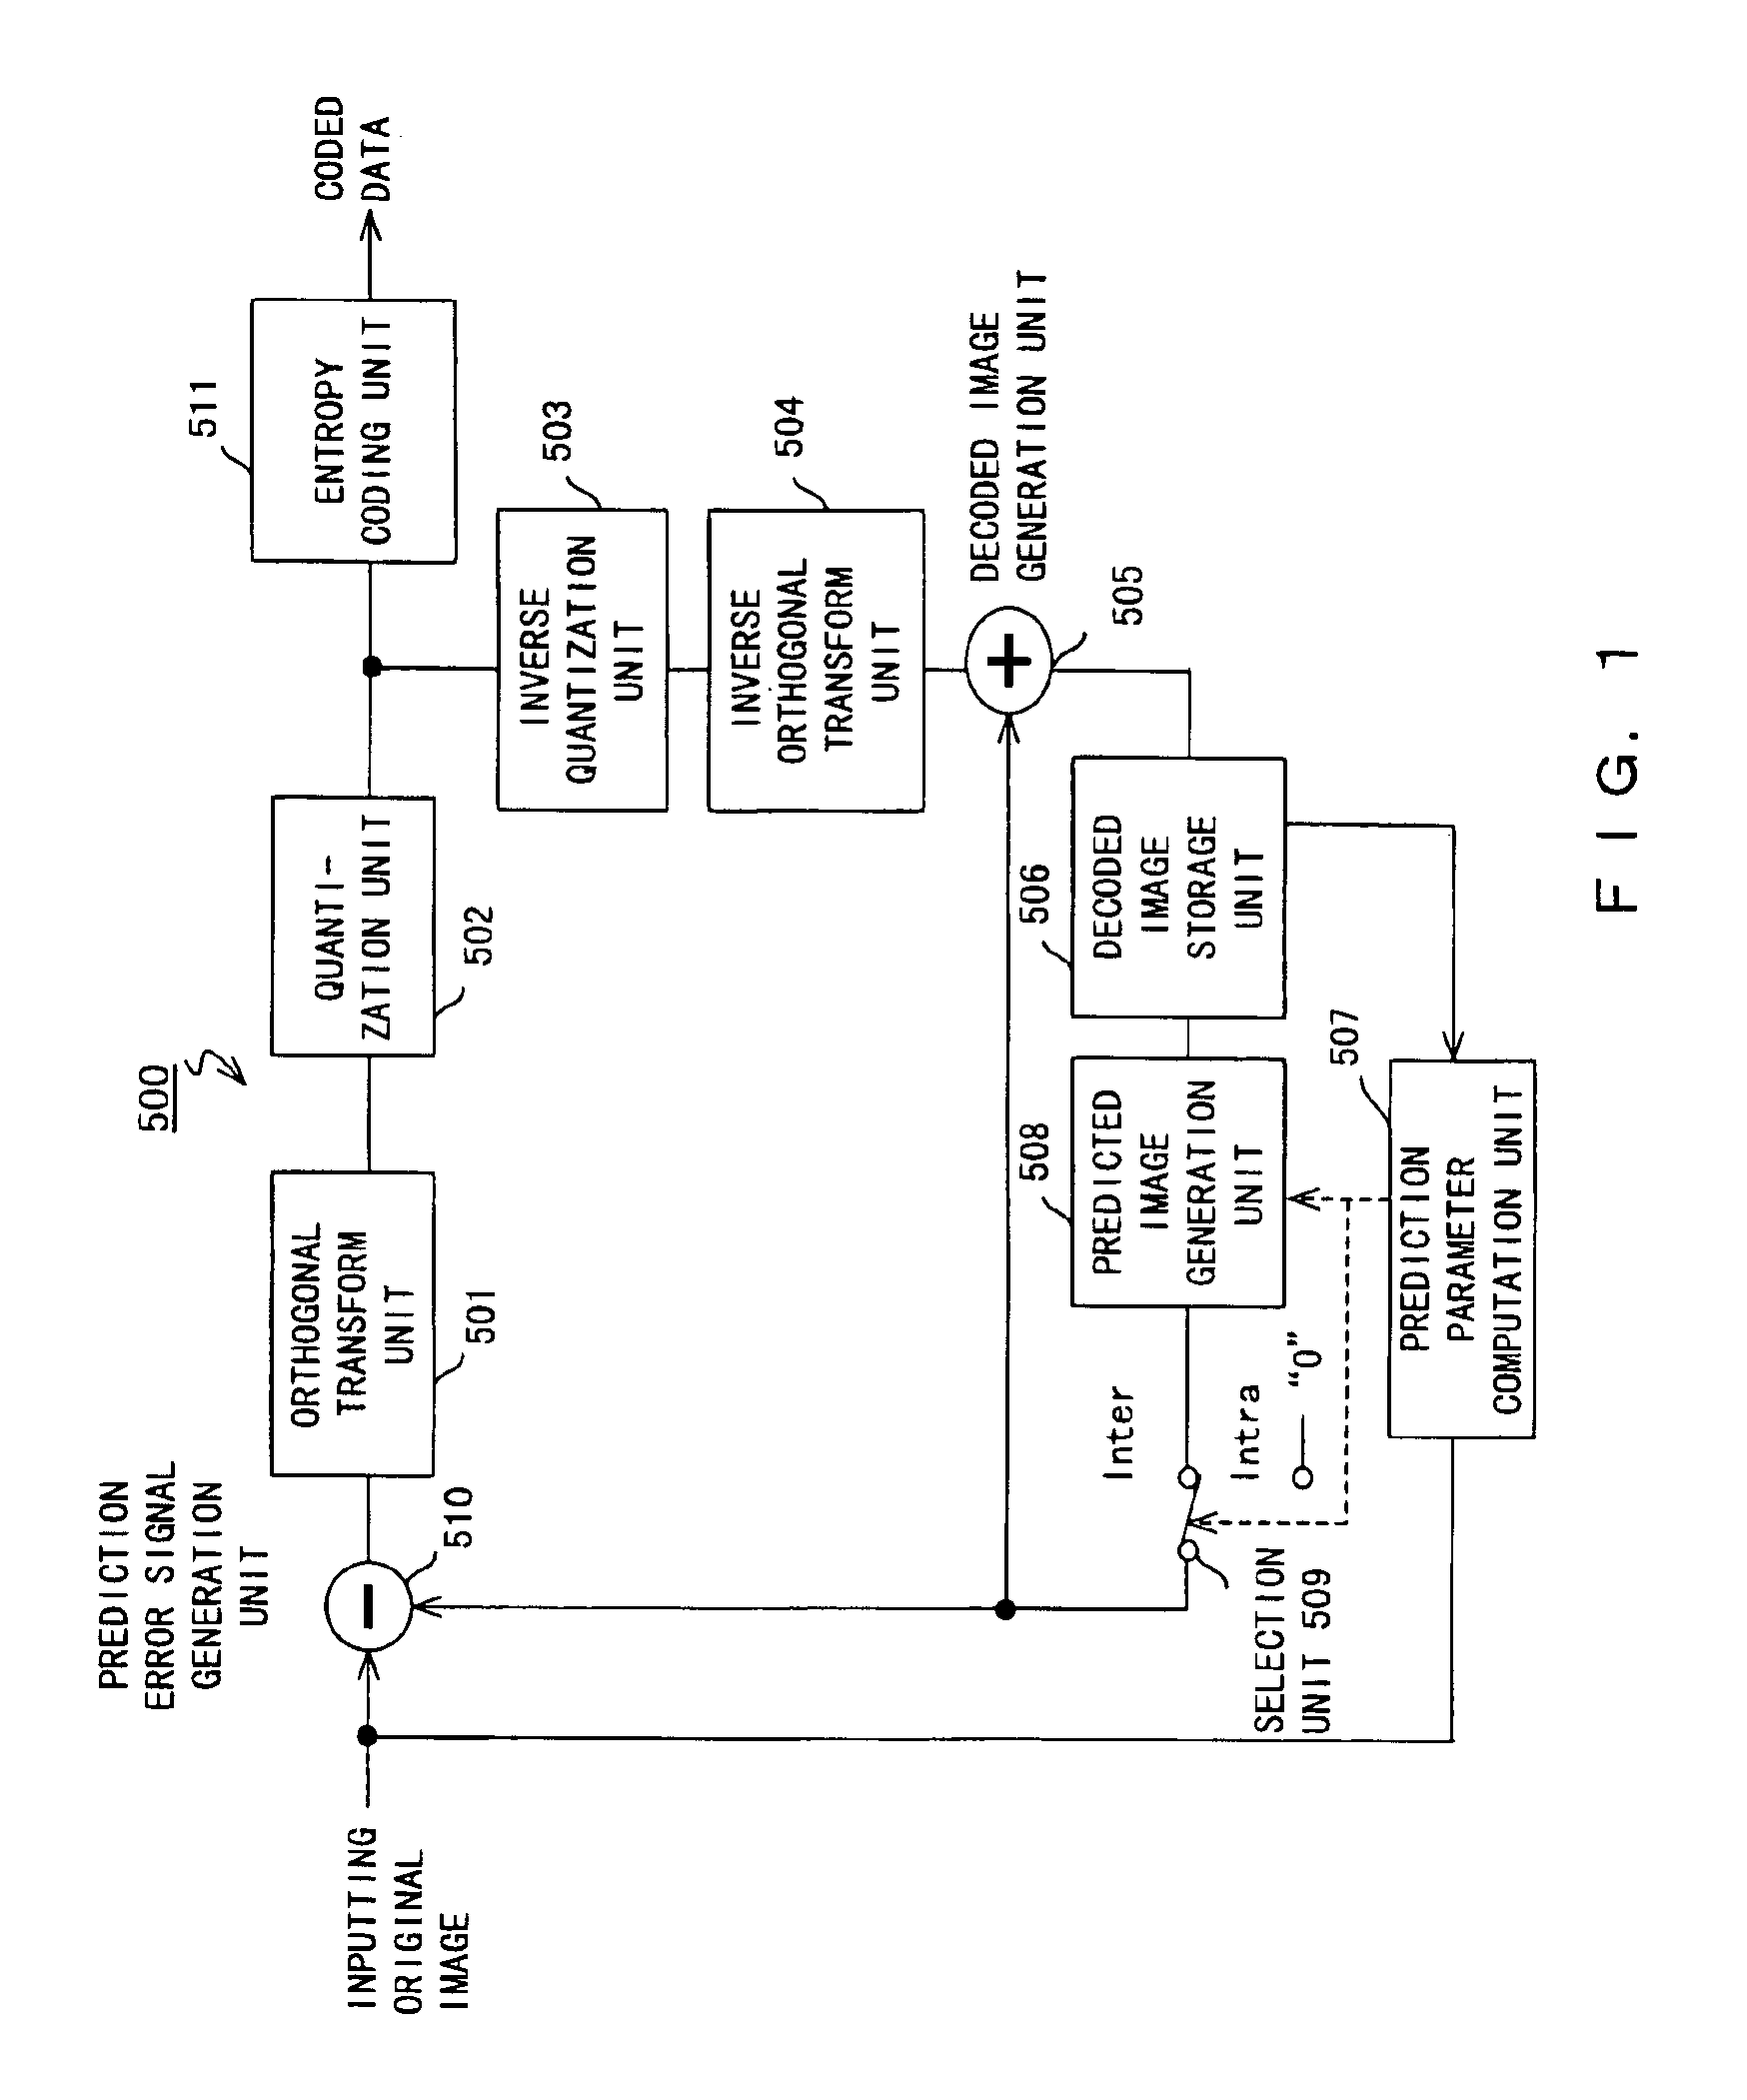 Encoder and decoder for moving picture